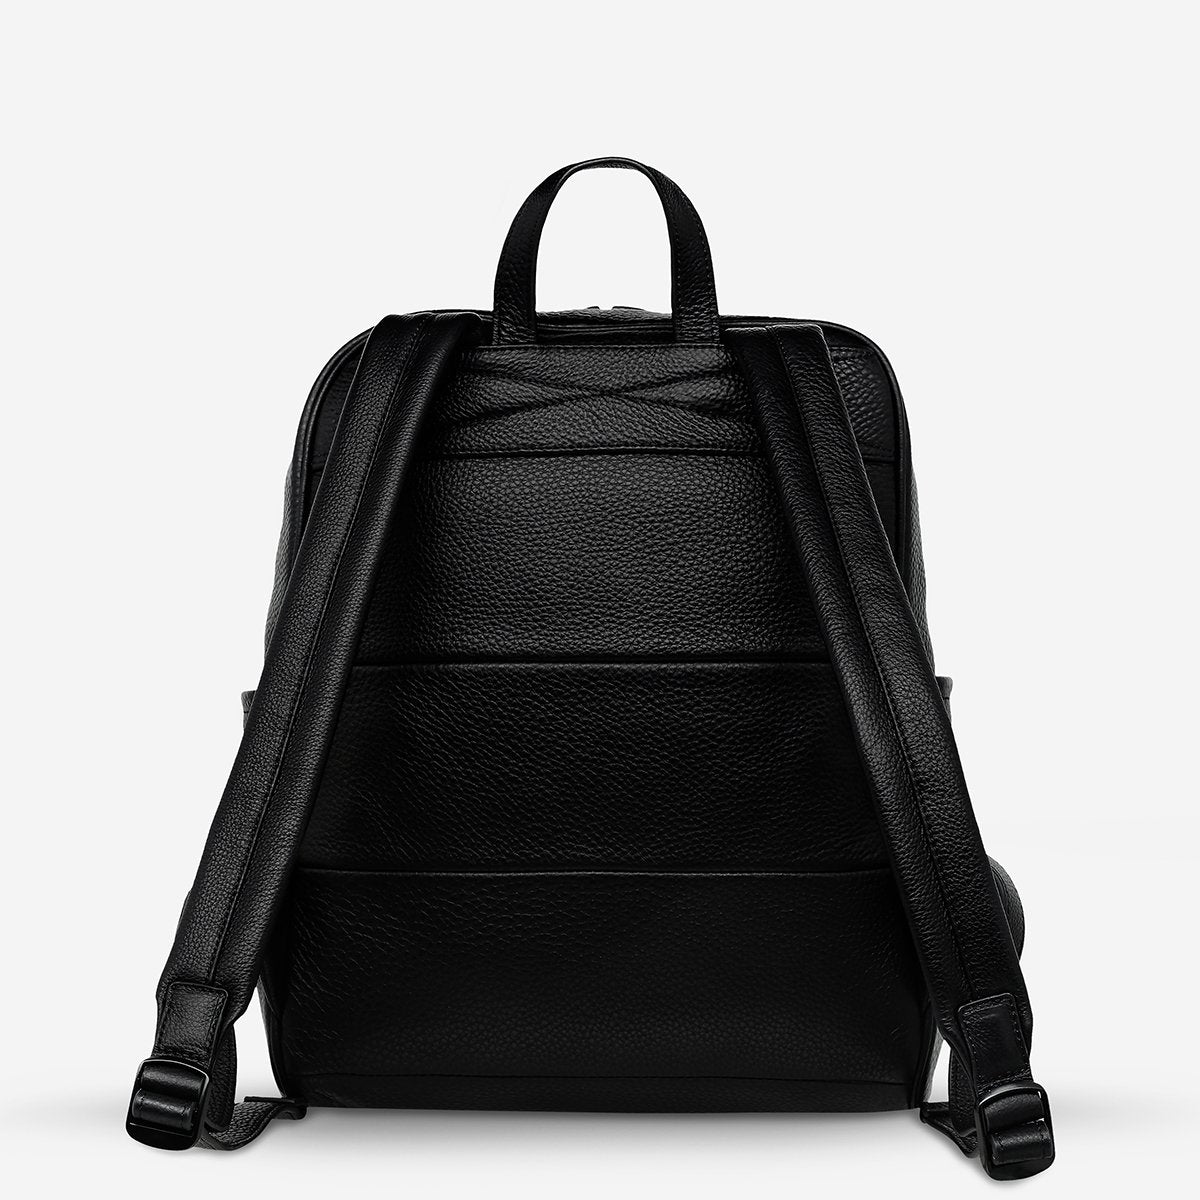 STATUS ANXIETY // If You Call Leather Backpack BLACK